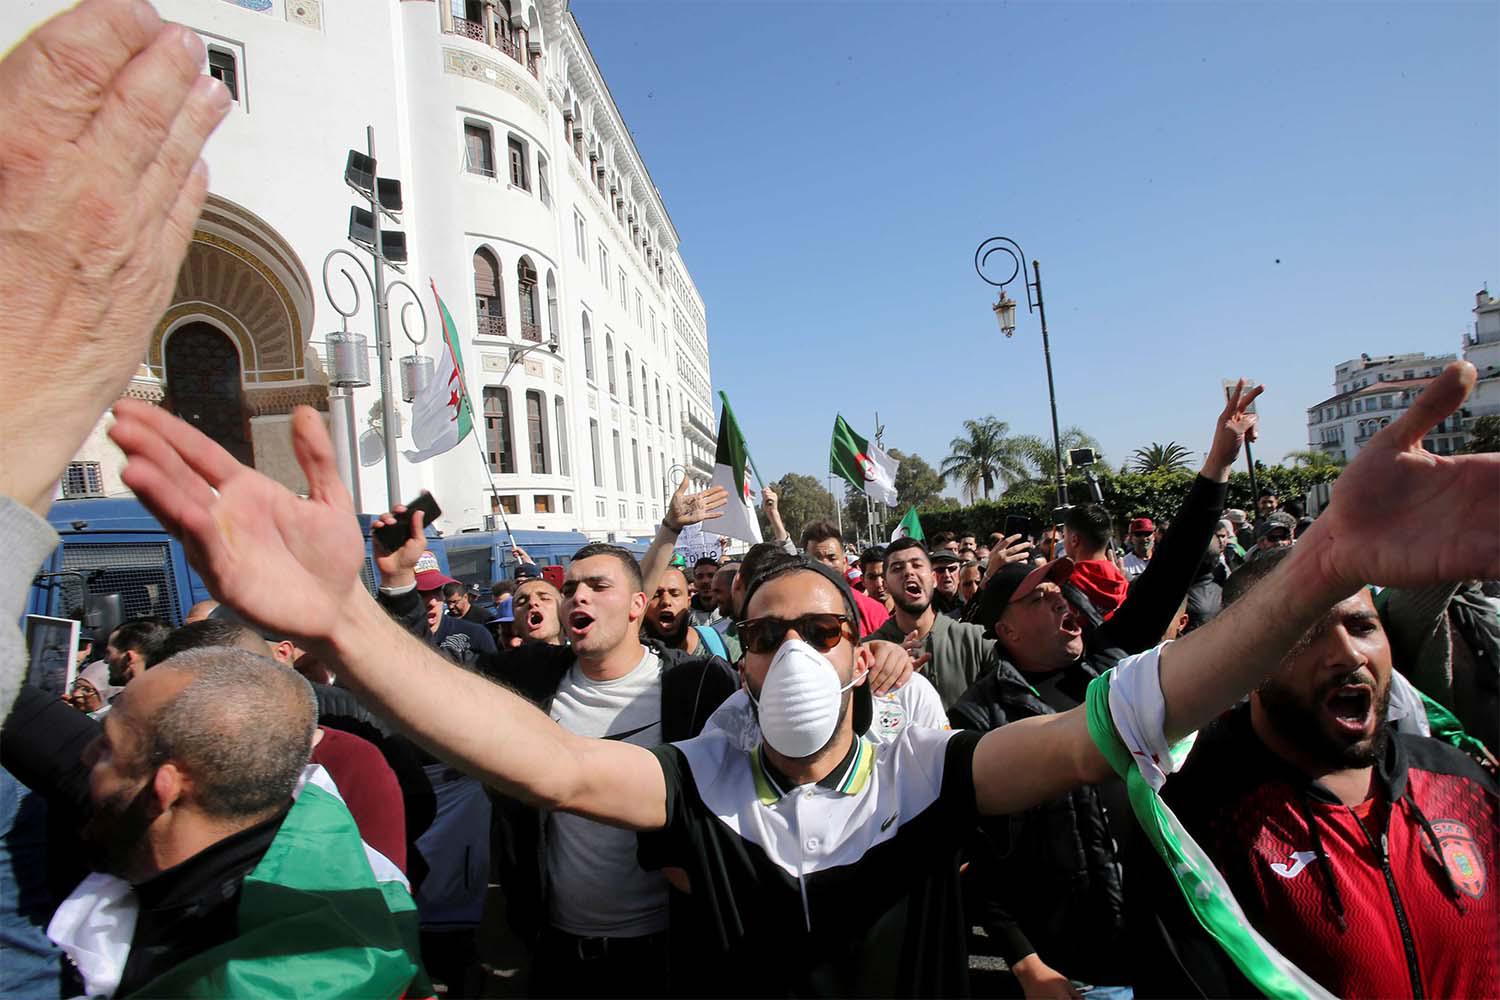 A demonstrator wearing a face mask gestures during an anti-government protest in Algiers, February 28